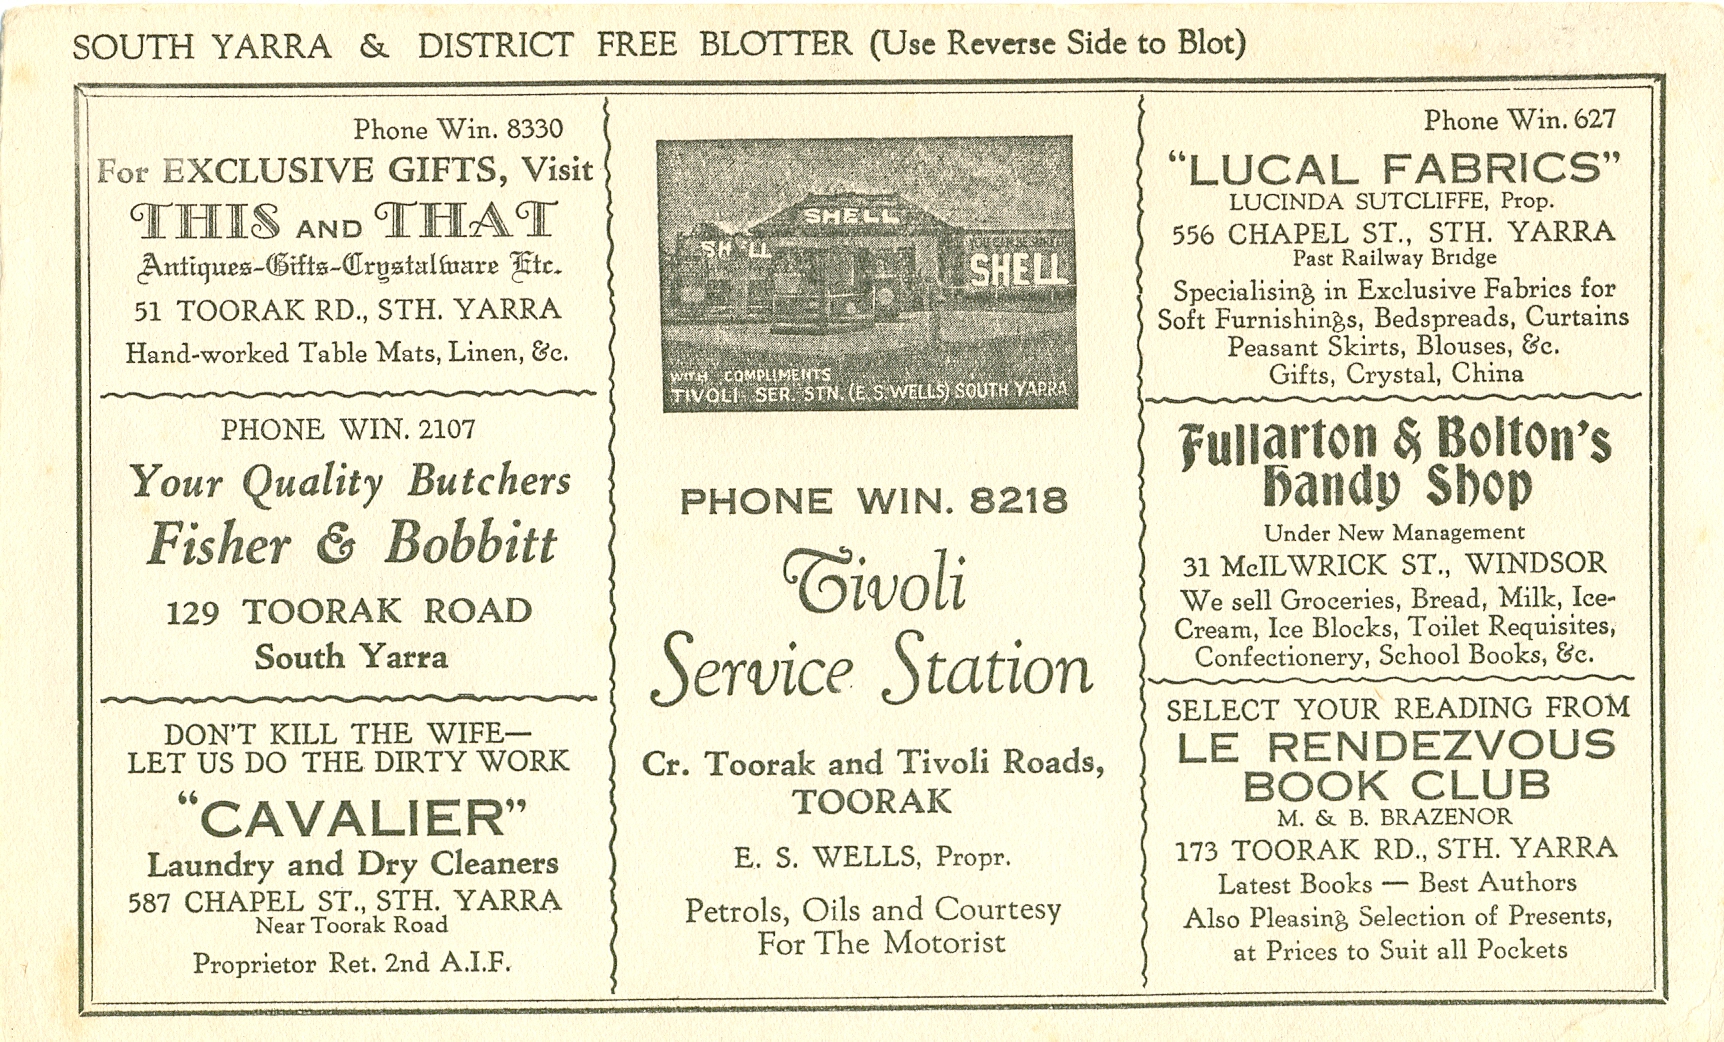 'South Yarra & District free blotter', blotter, 14 x 22.5 cm. 1940s?Collection of Andrew H.